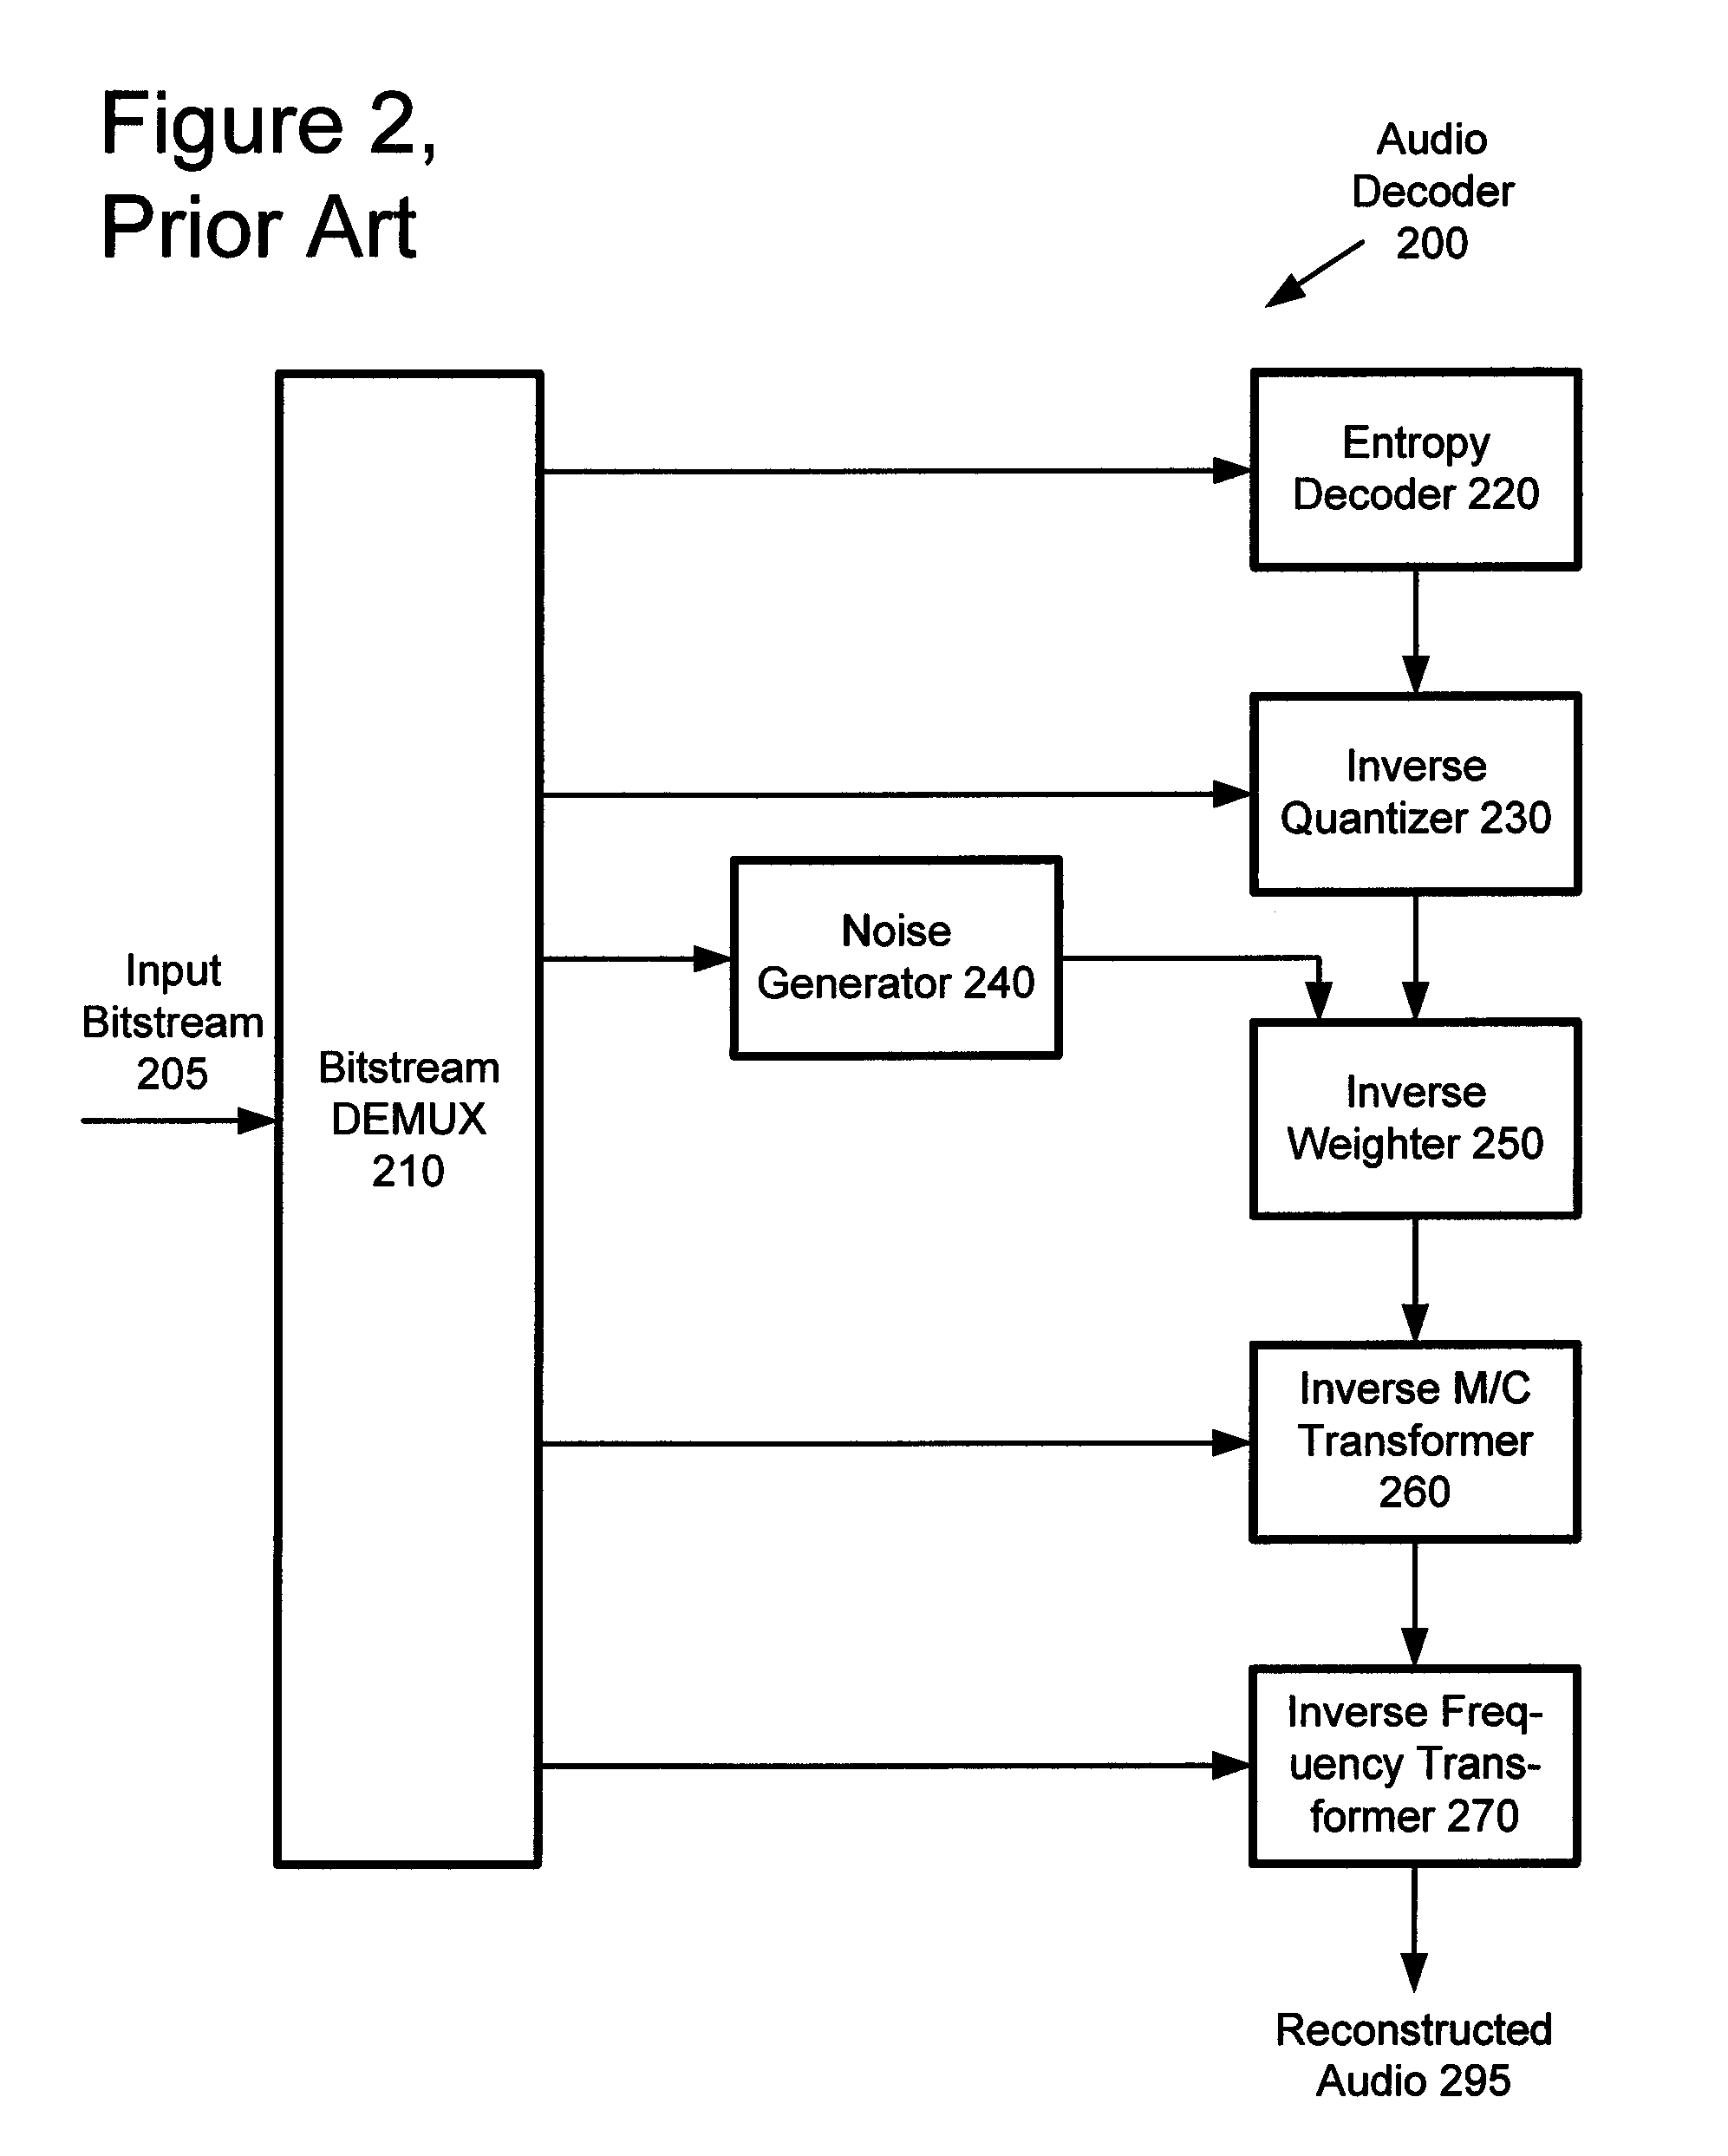 Multi-channel audio encoding and decoding